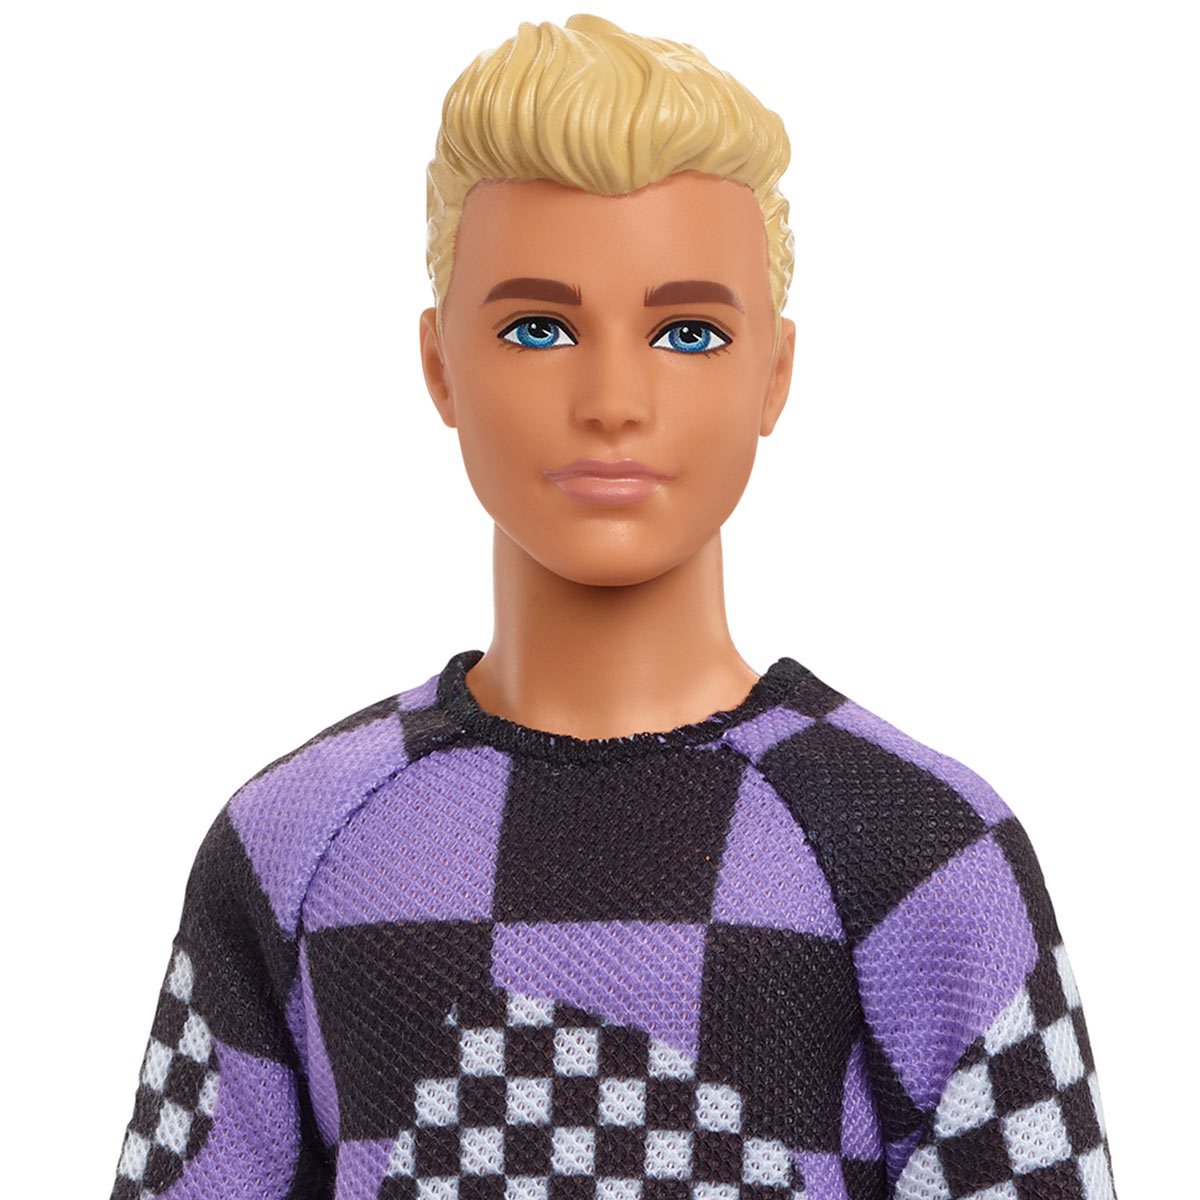 omvang speer Vooruitgang Barbie Ken Fashionista Doll #191 with Checkered Sweater